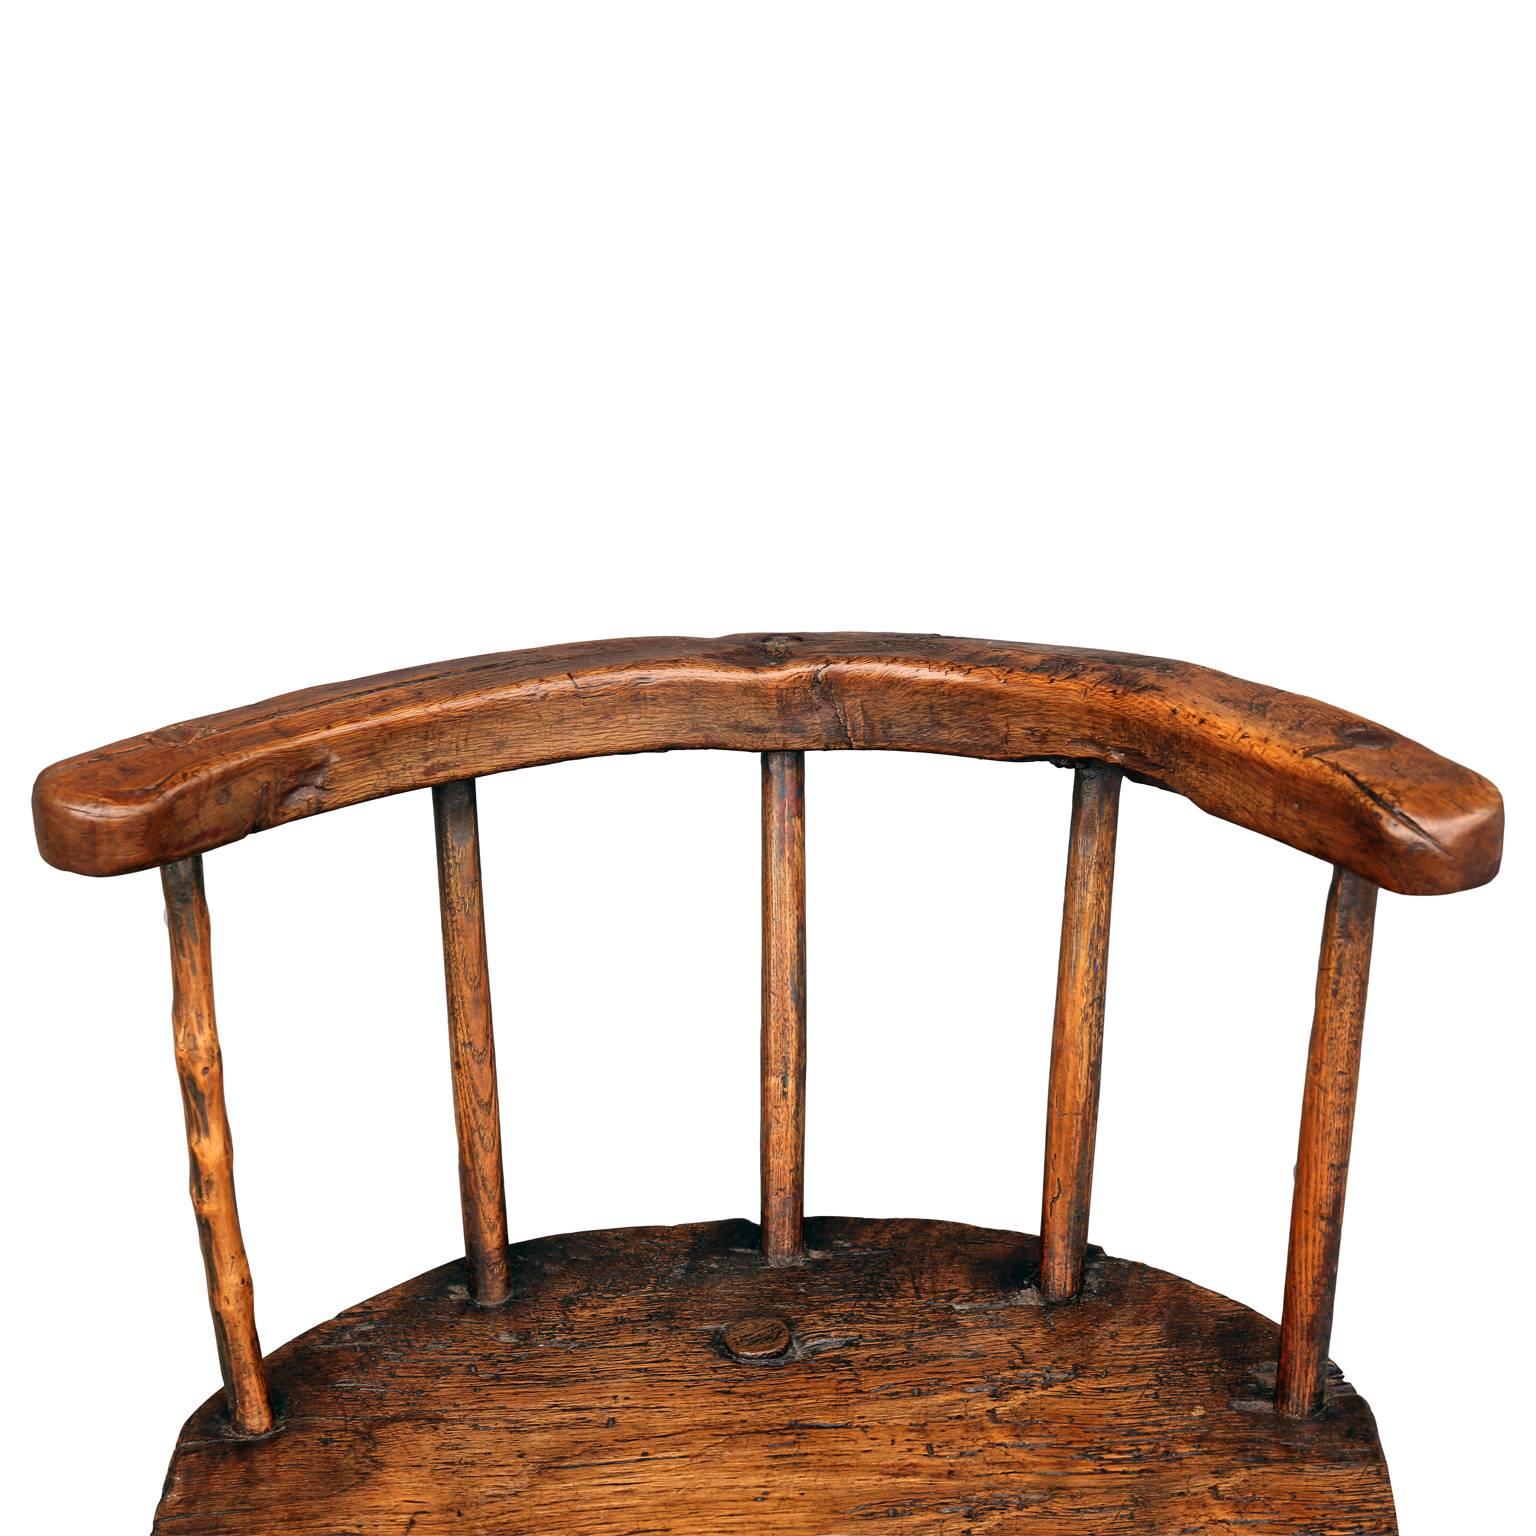 Carved Early 18th Century Stick Chair from Wales